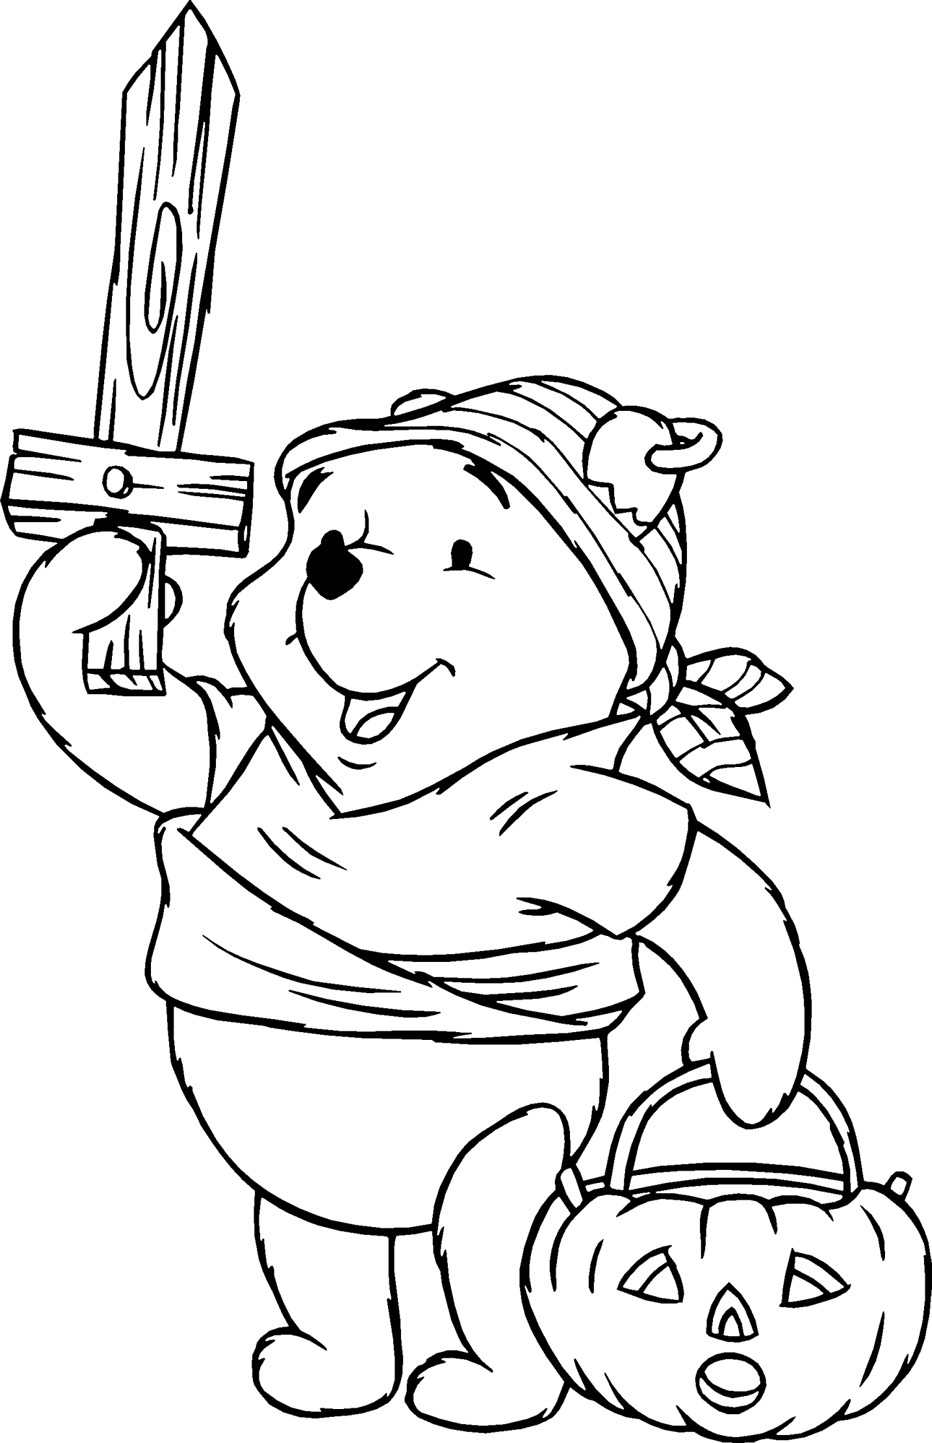  Coloring Sheets For Kids Printable For Free 4